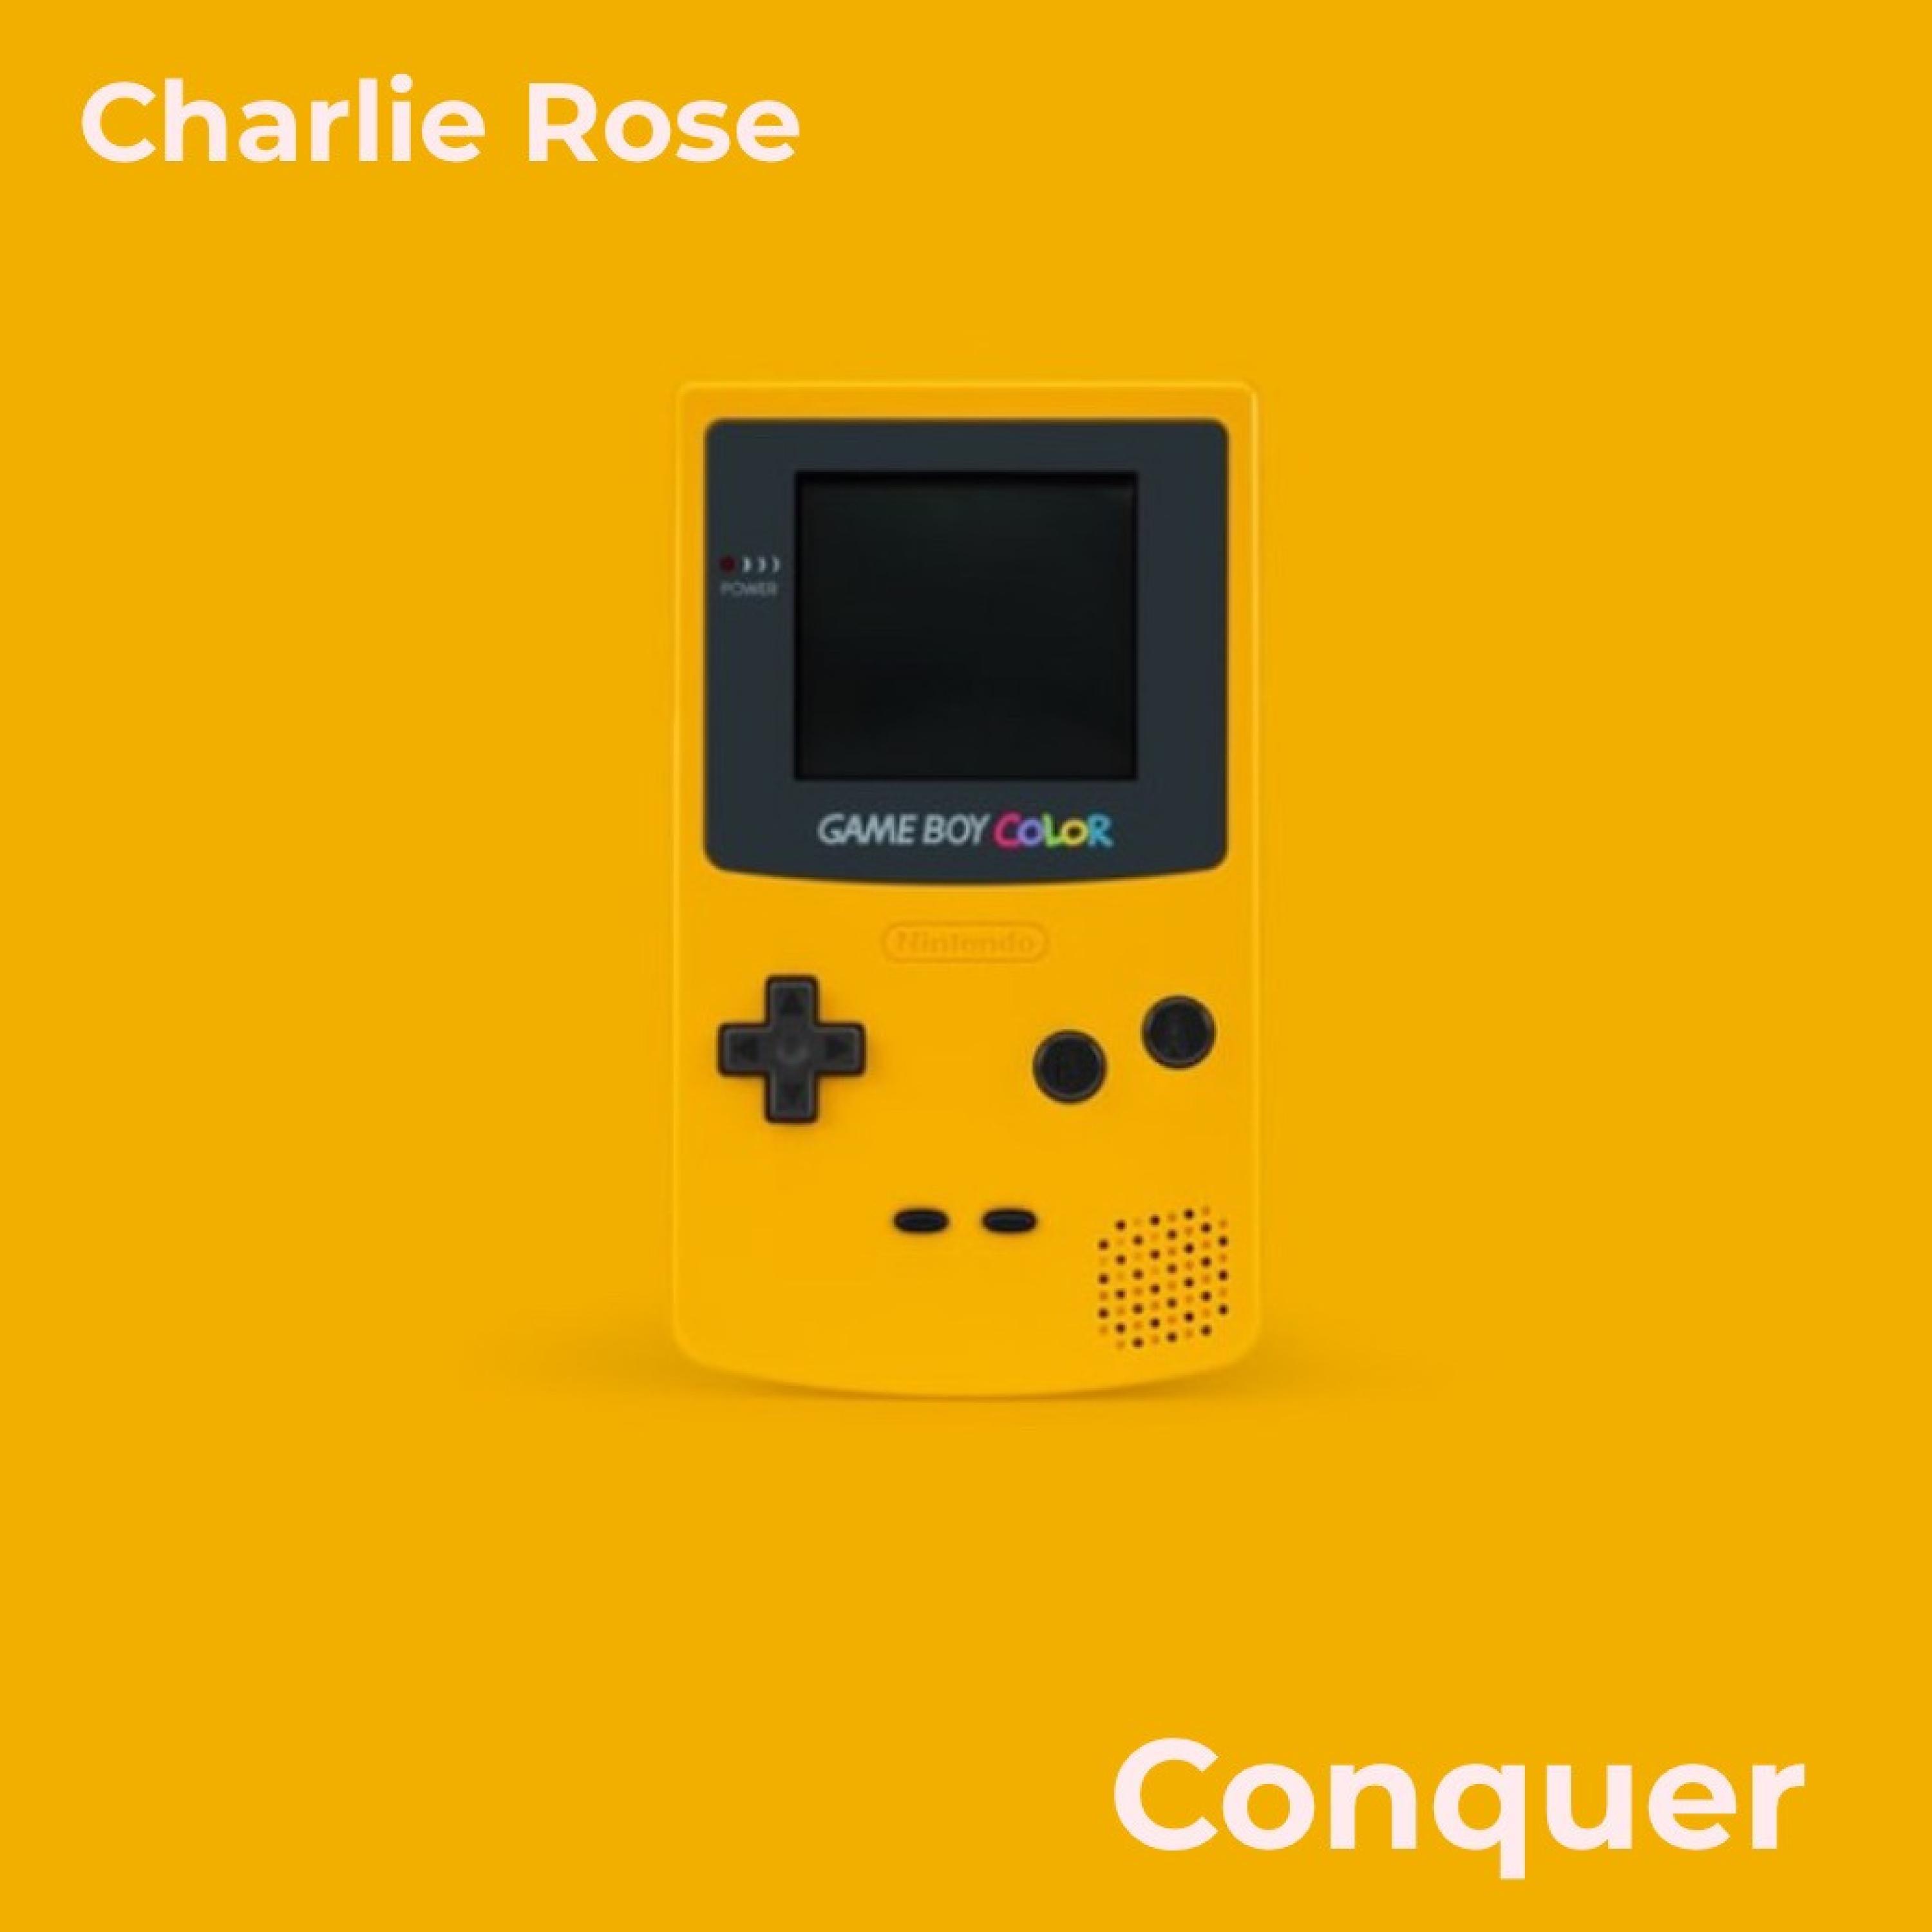 Charlie Rose - Conquer